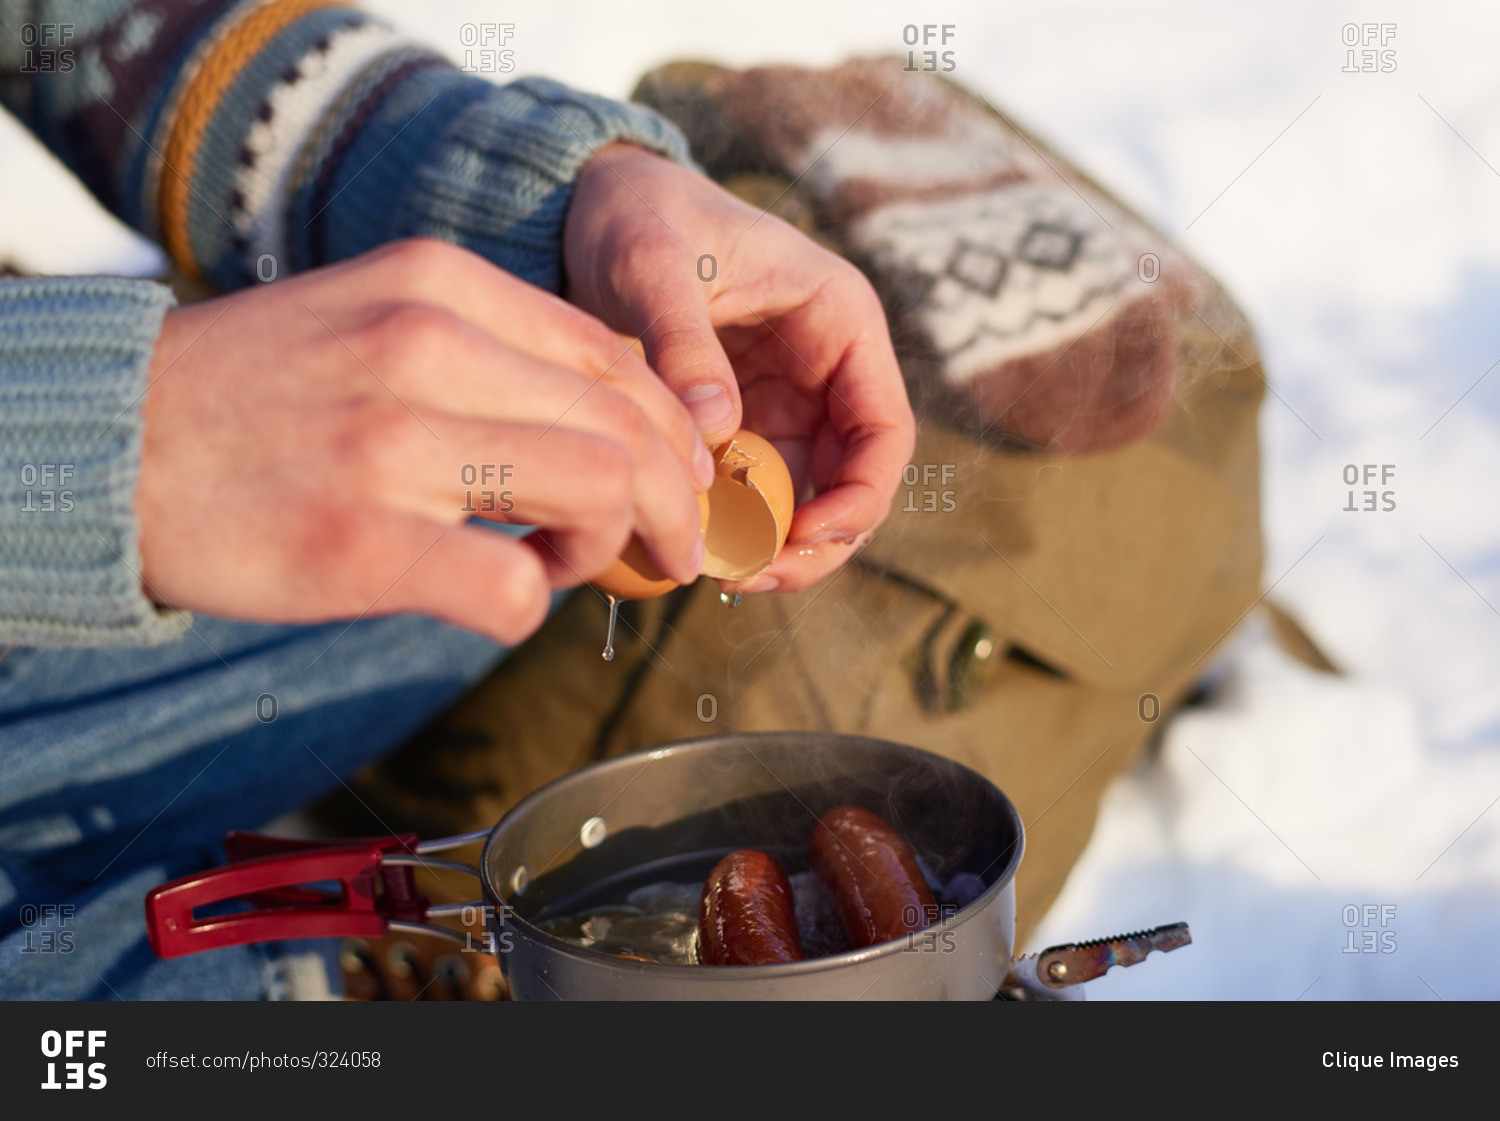 Man making eggs and sausages over a campstove in the snow